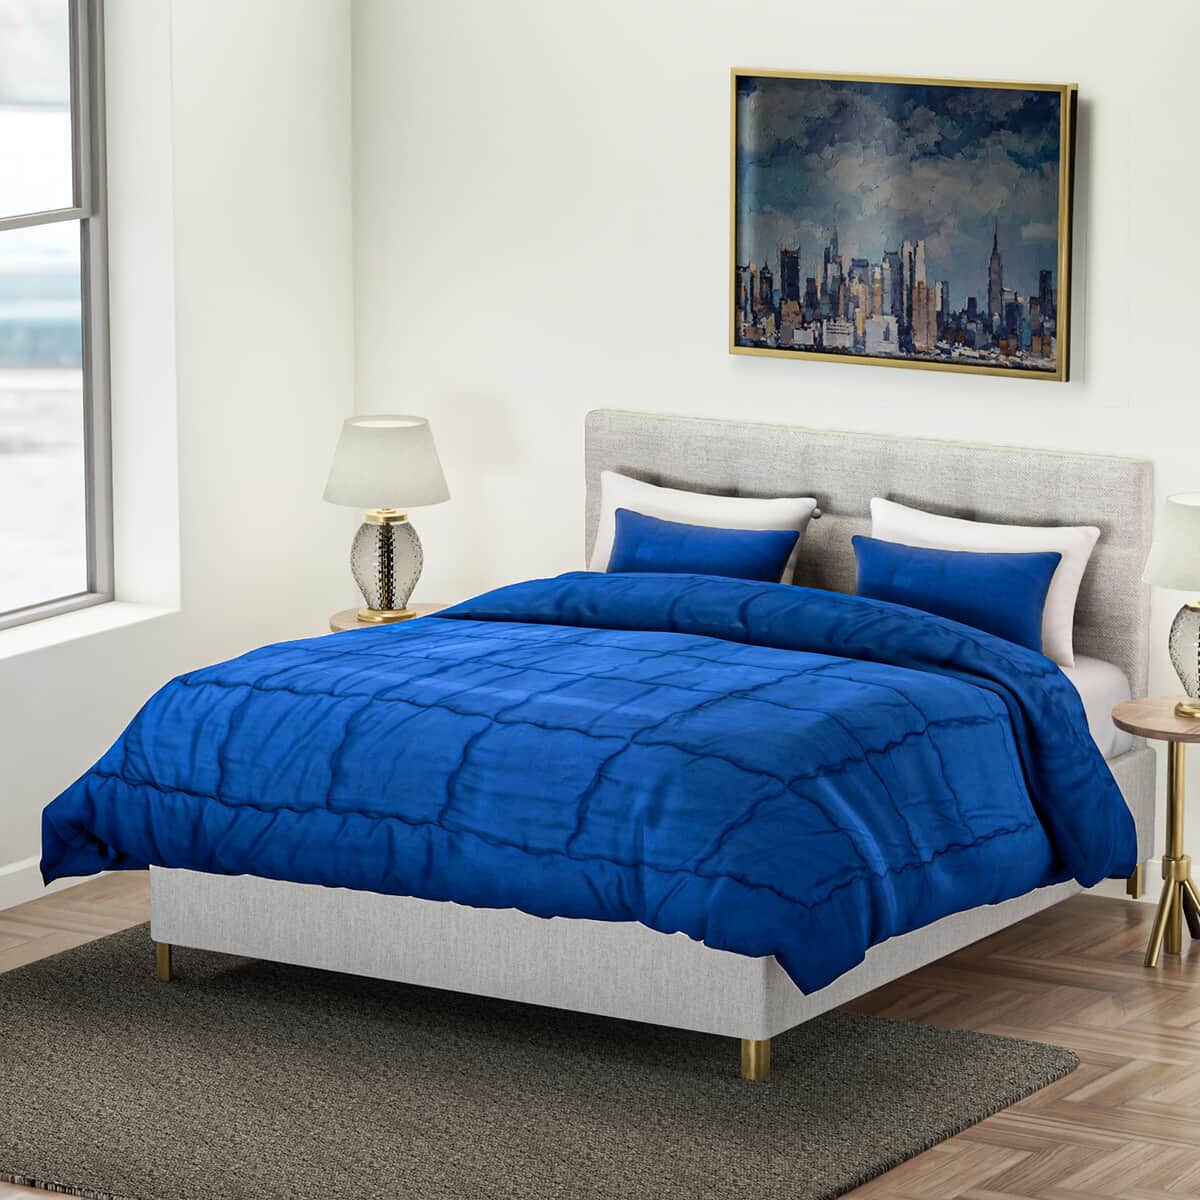 Homesmart Navy Quilted Pattern Microfiber Comforter and 2pcs Pillow Cover - Queen image number 0